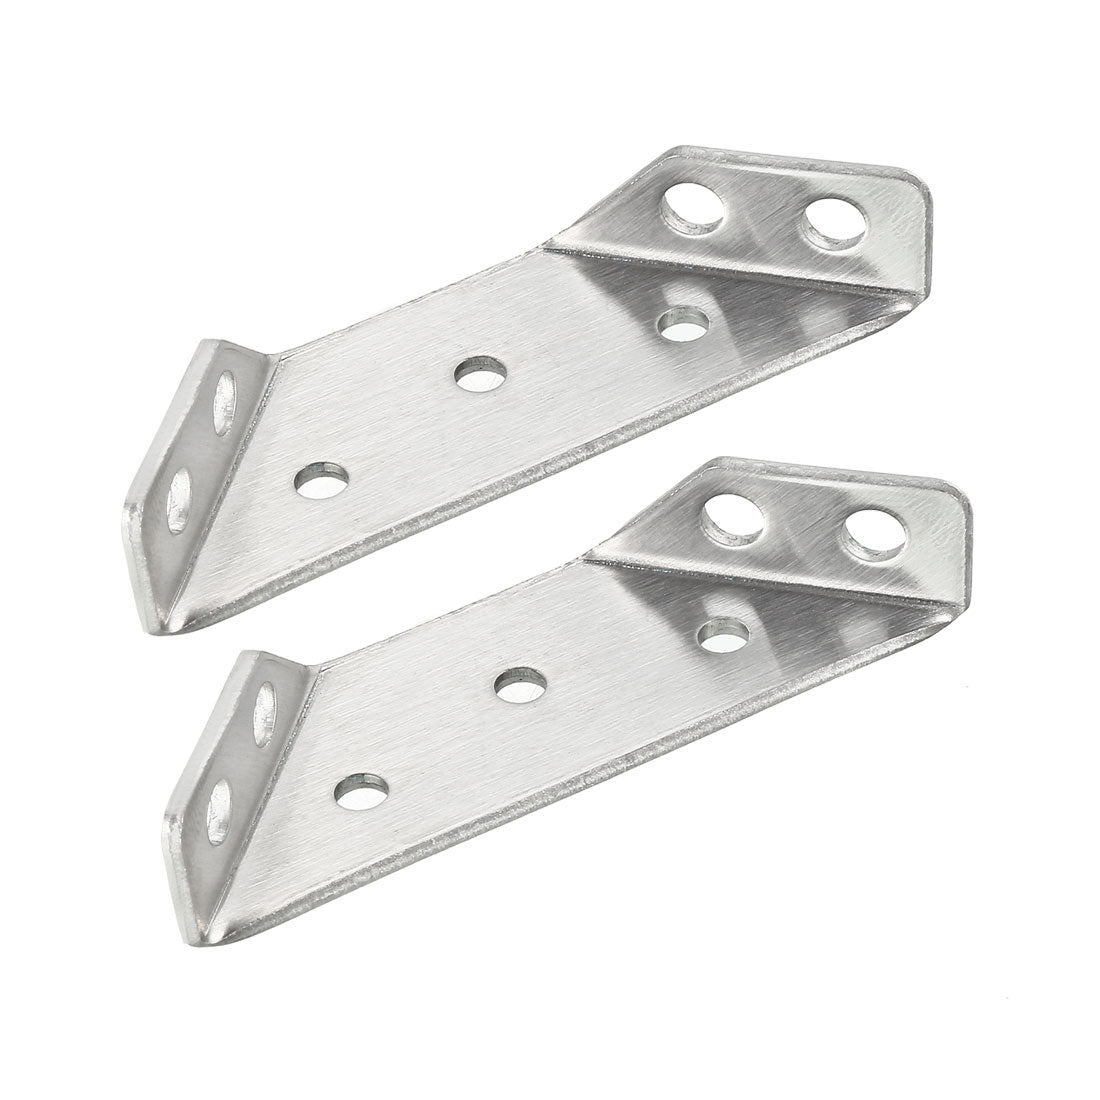 uxcell Uxcell Shelf Angle Bracket Joining Support Corner Brace, 50mm x 50mm,Stainless Steel Silver Tone, 10Pcs